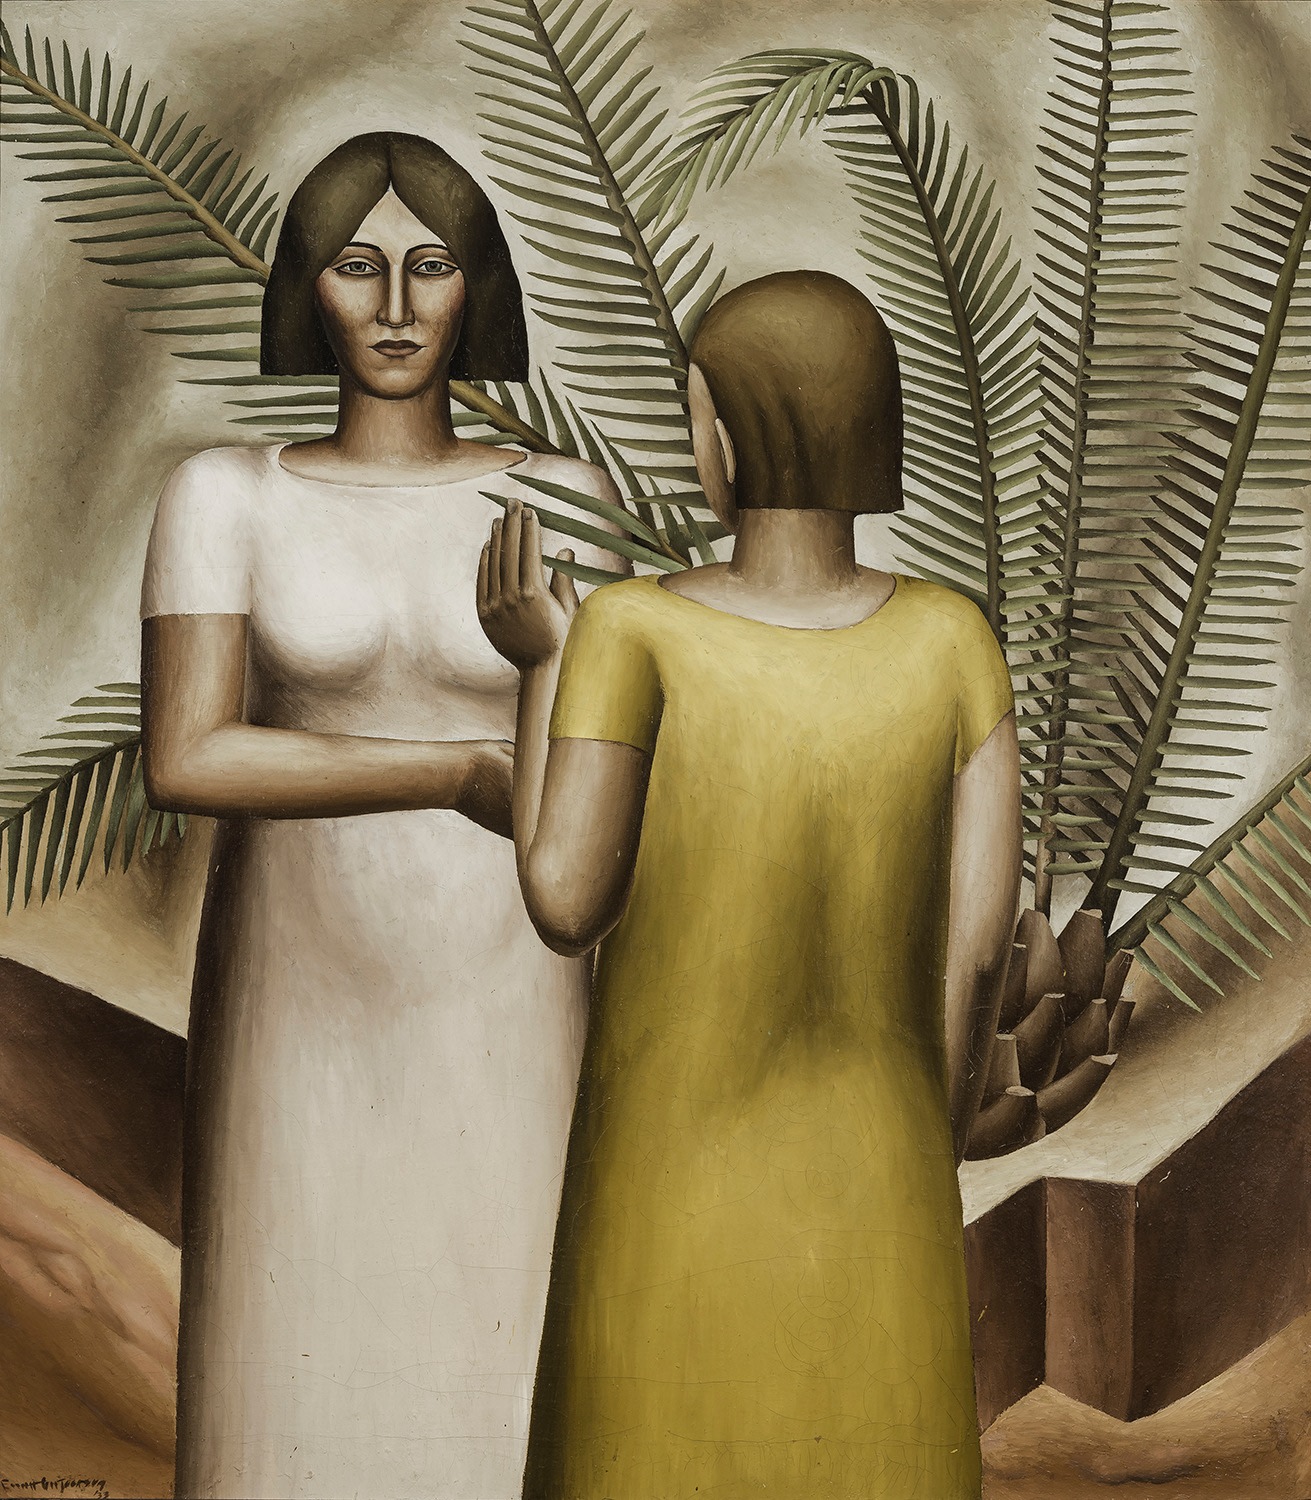 Two Girls and Palm, 1933, Oil on canvas, 36 1/2 x 32 in.